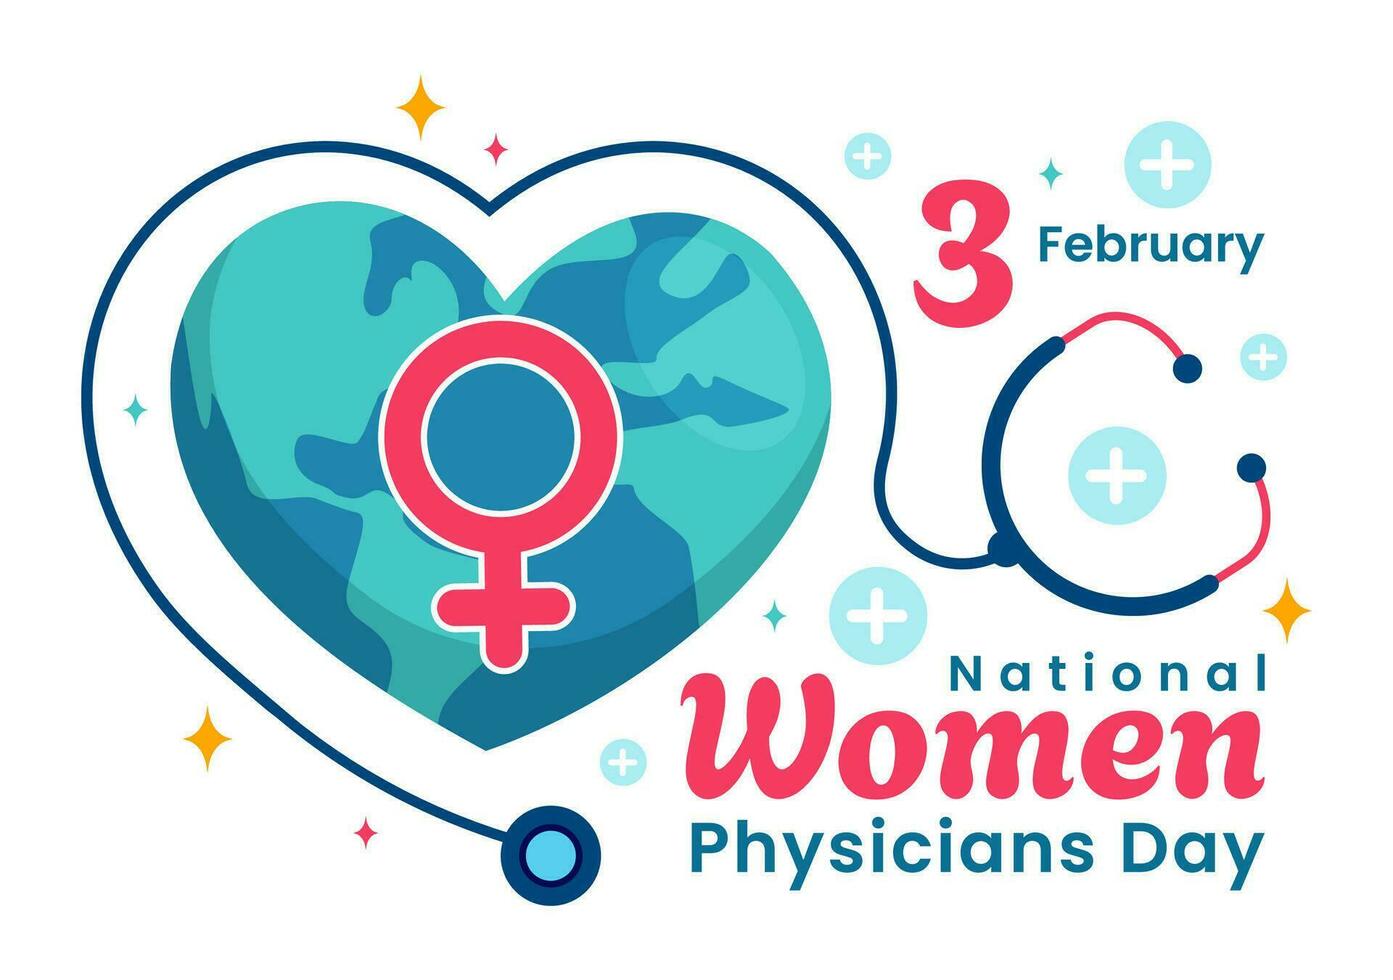 National Women Physicians Day Vector Illustration on February 3 to Honor Female Doctors Across the Country in Flat Cartoon Background Design